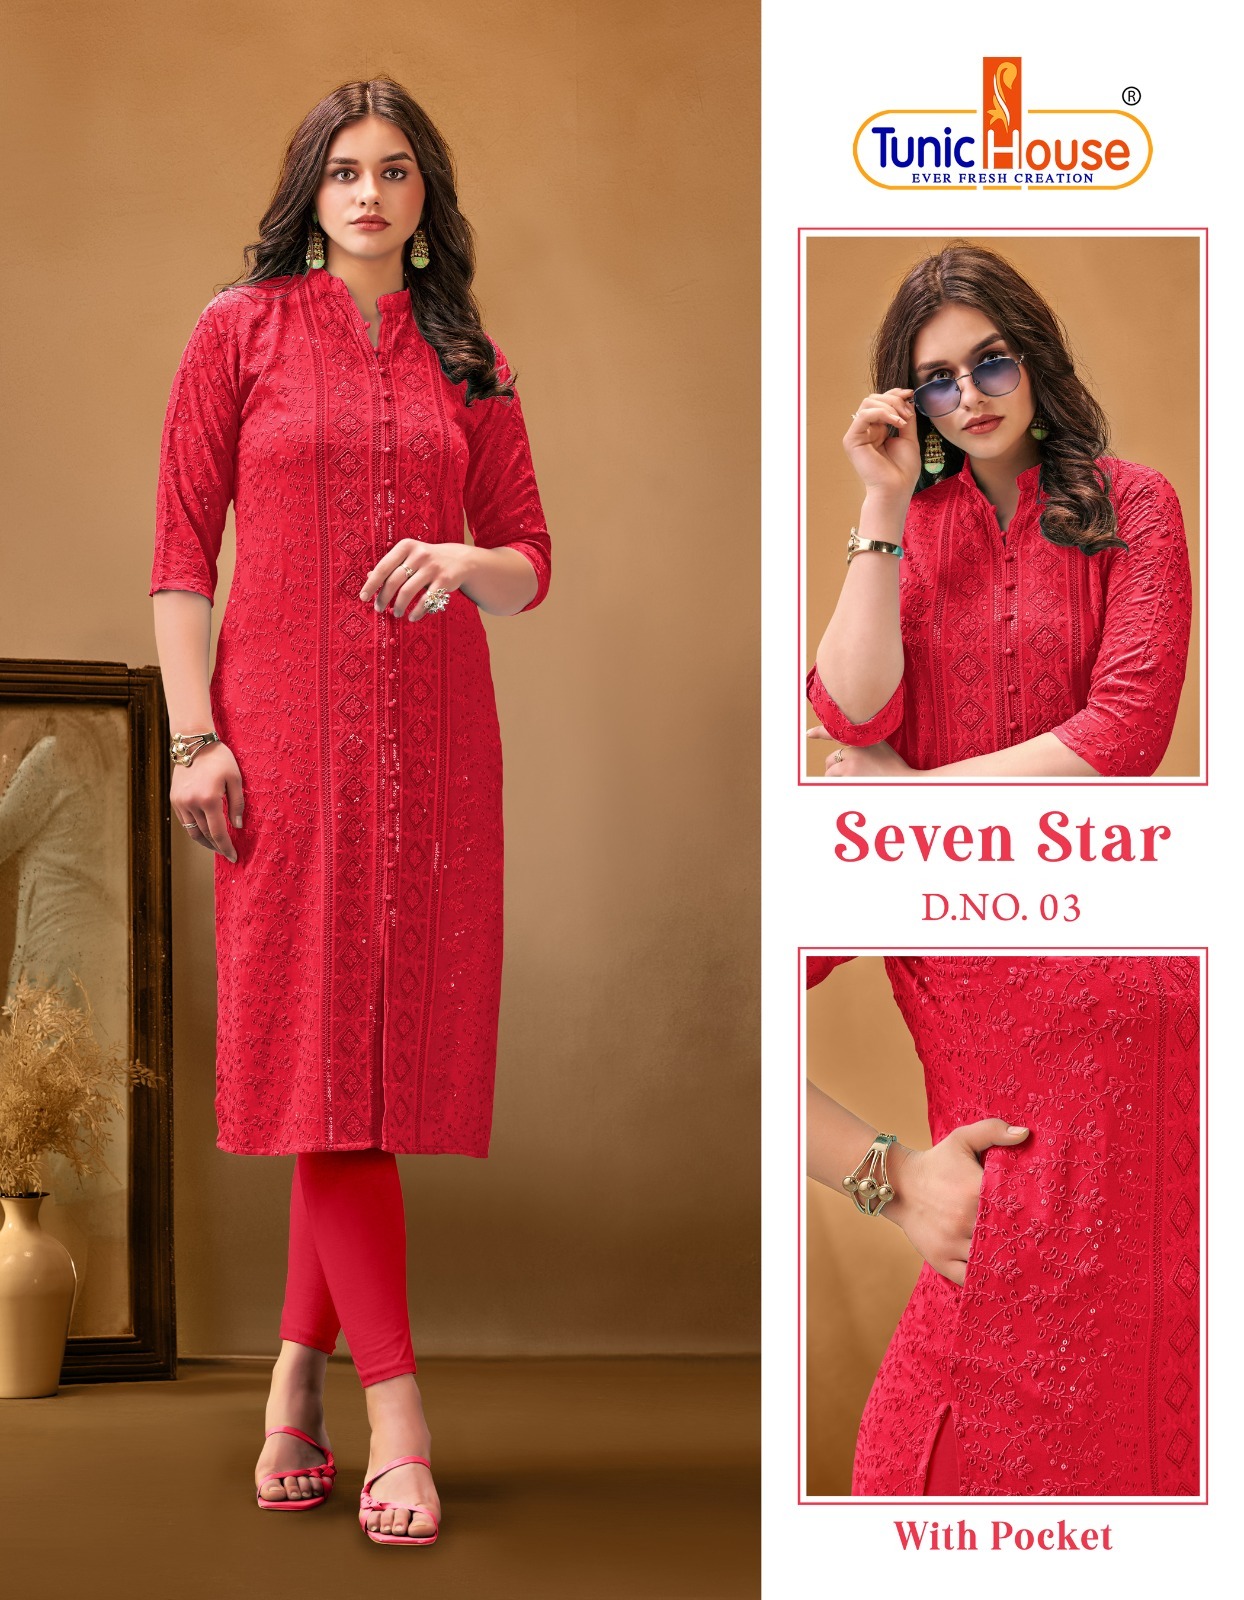 Tunic Houes 7 Star collection 22